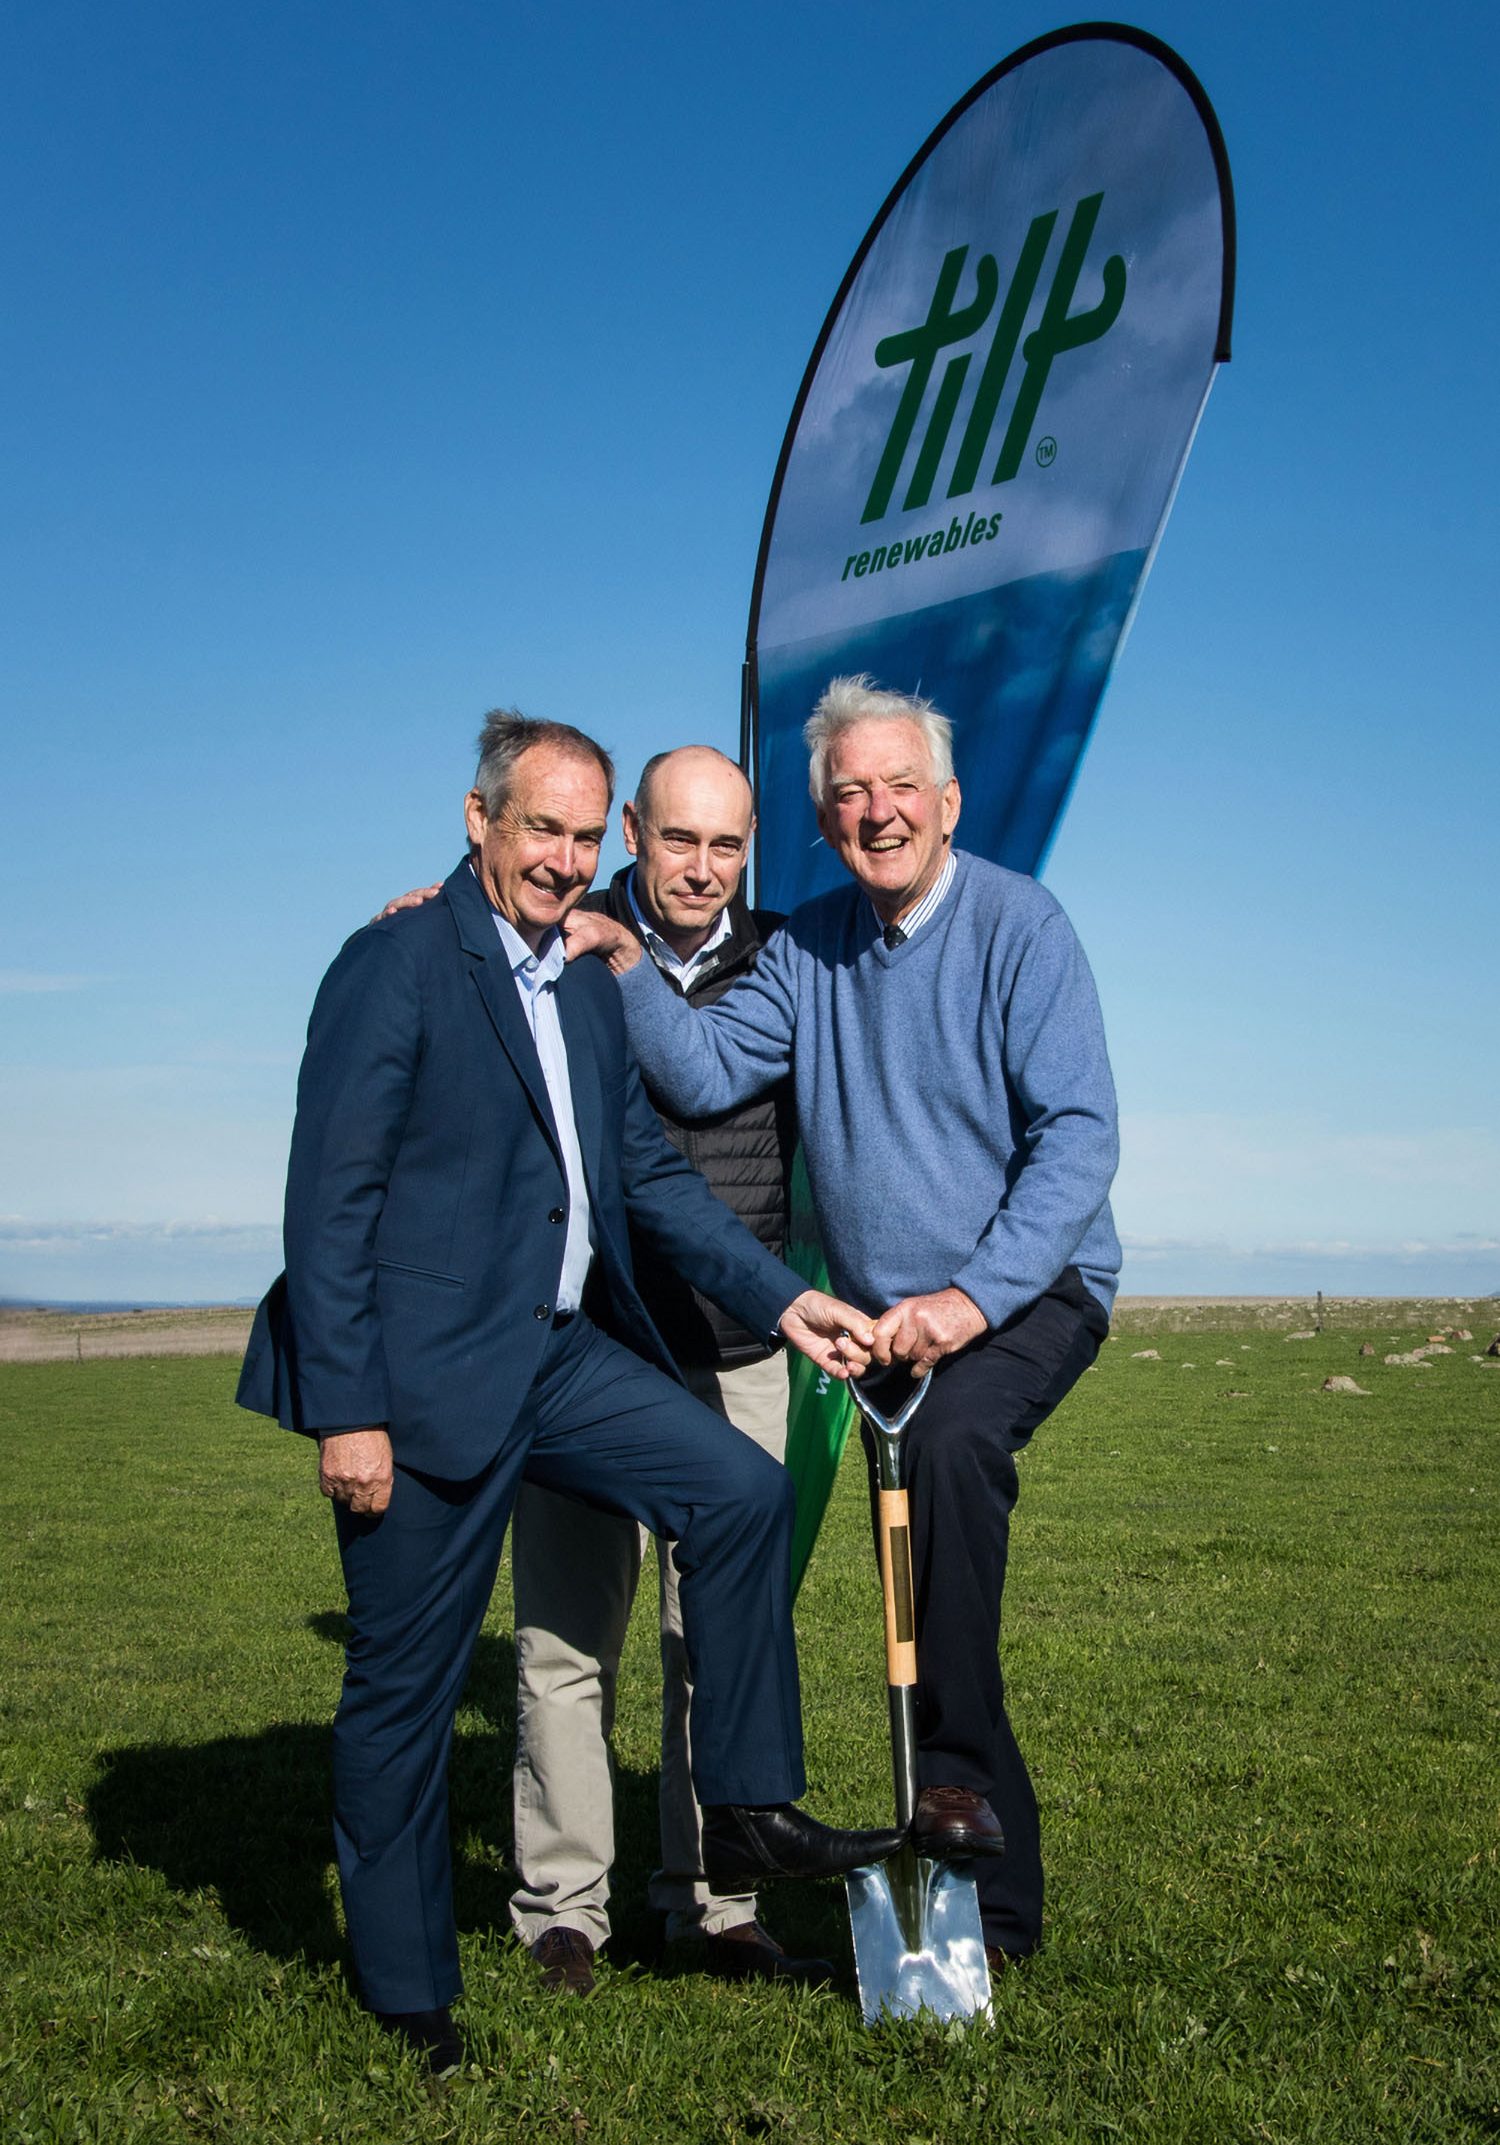 Turning the first sod at the Salt Creek Wind Farm
Left to right: James Purcell MP, Robert Farron, Peter Coy
Image Credit: Emily Wilson Photography